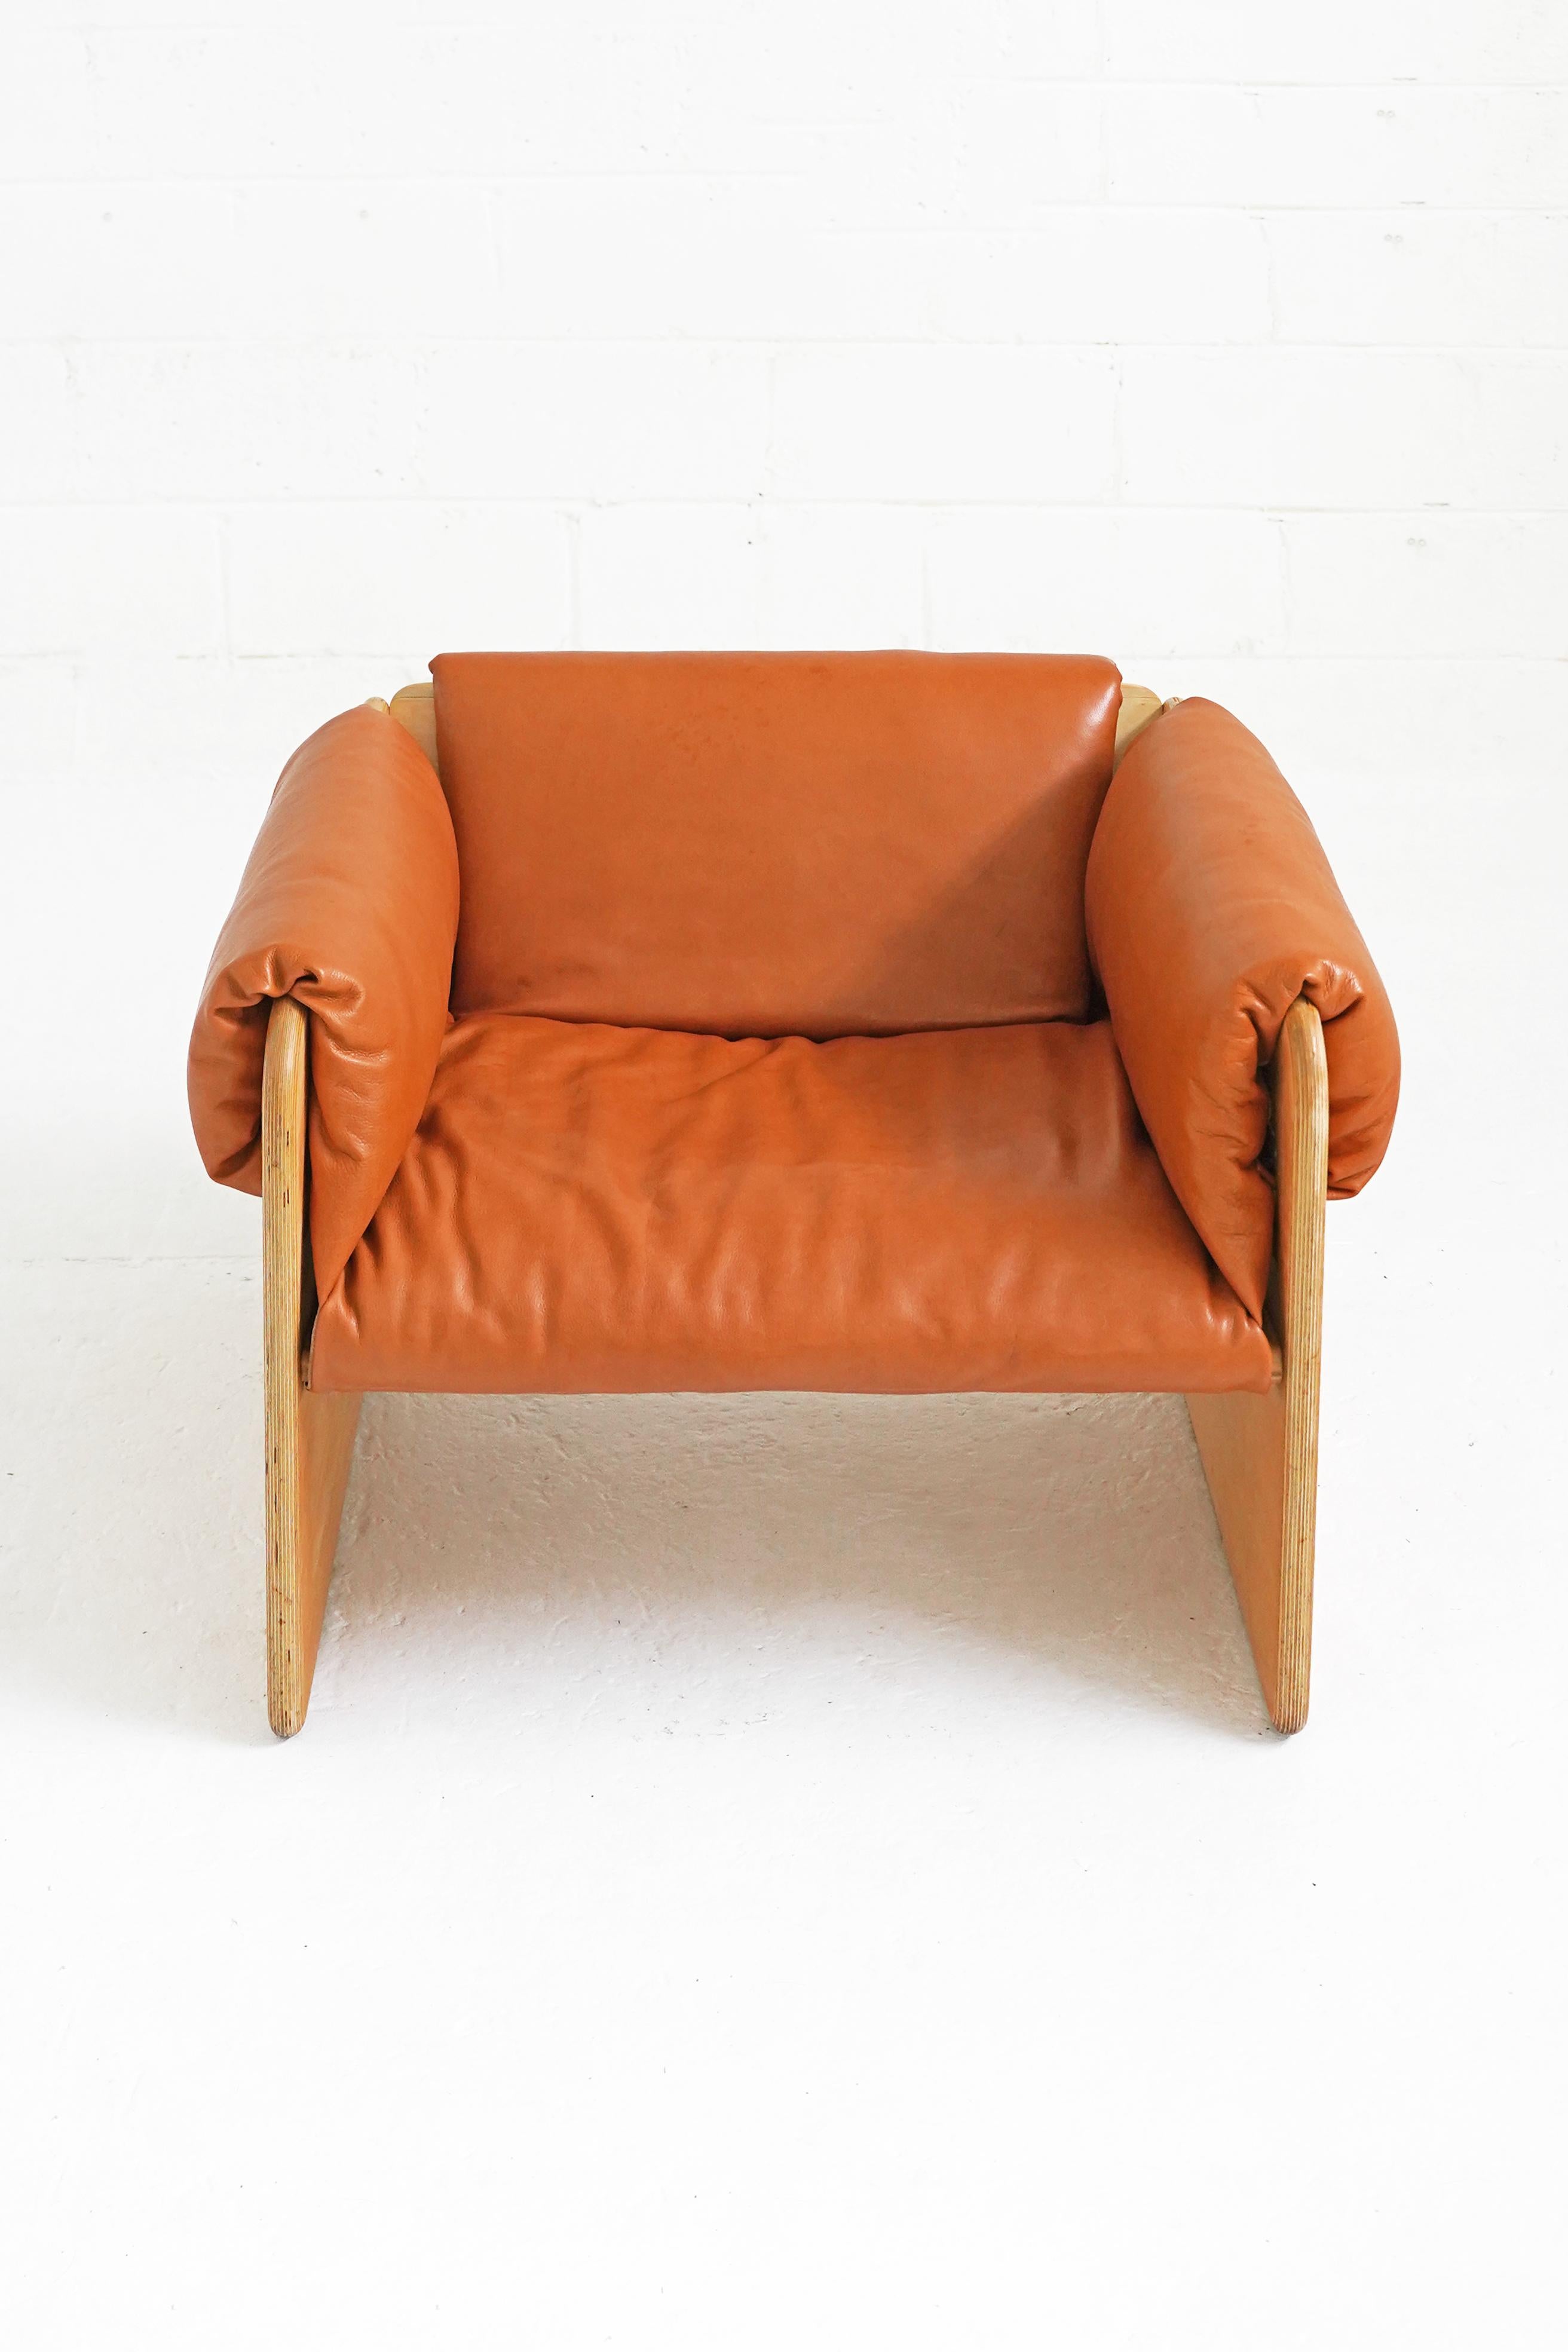 Renaissance Easy Chair in Maple and Leather by Keith Muller and Michael Stewart 1